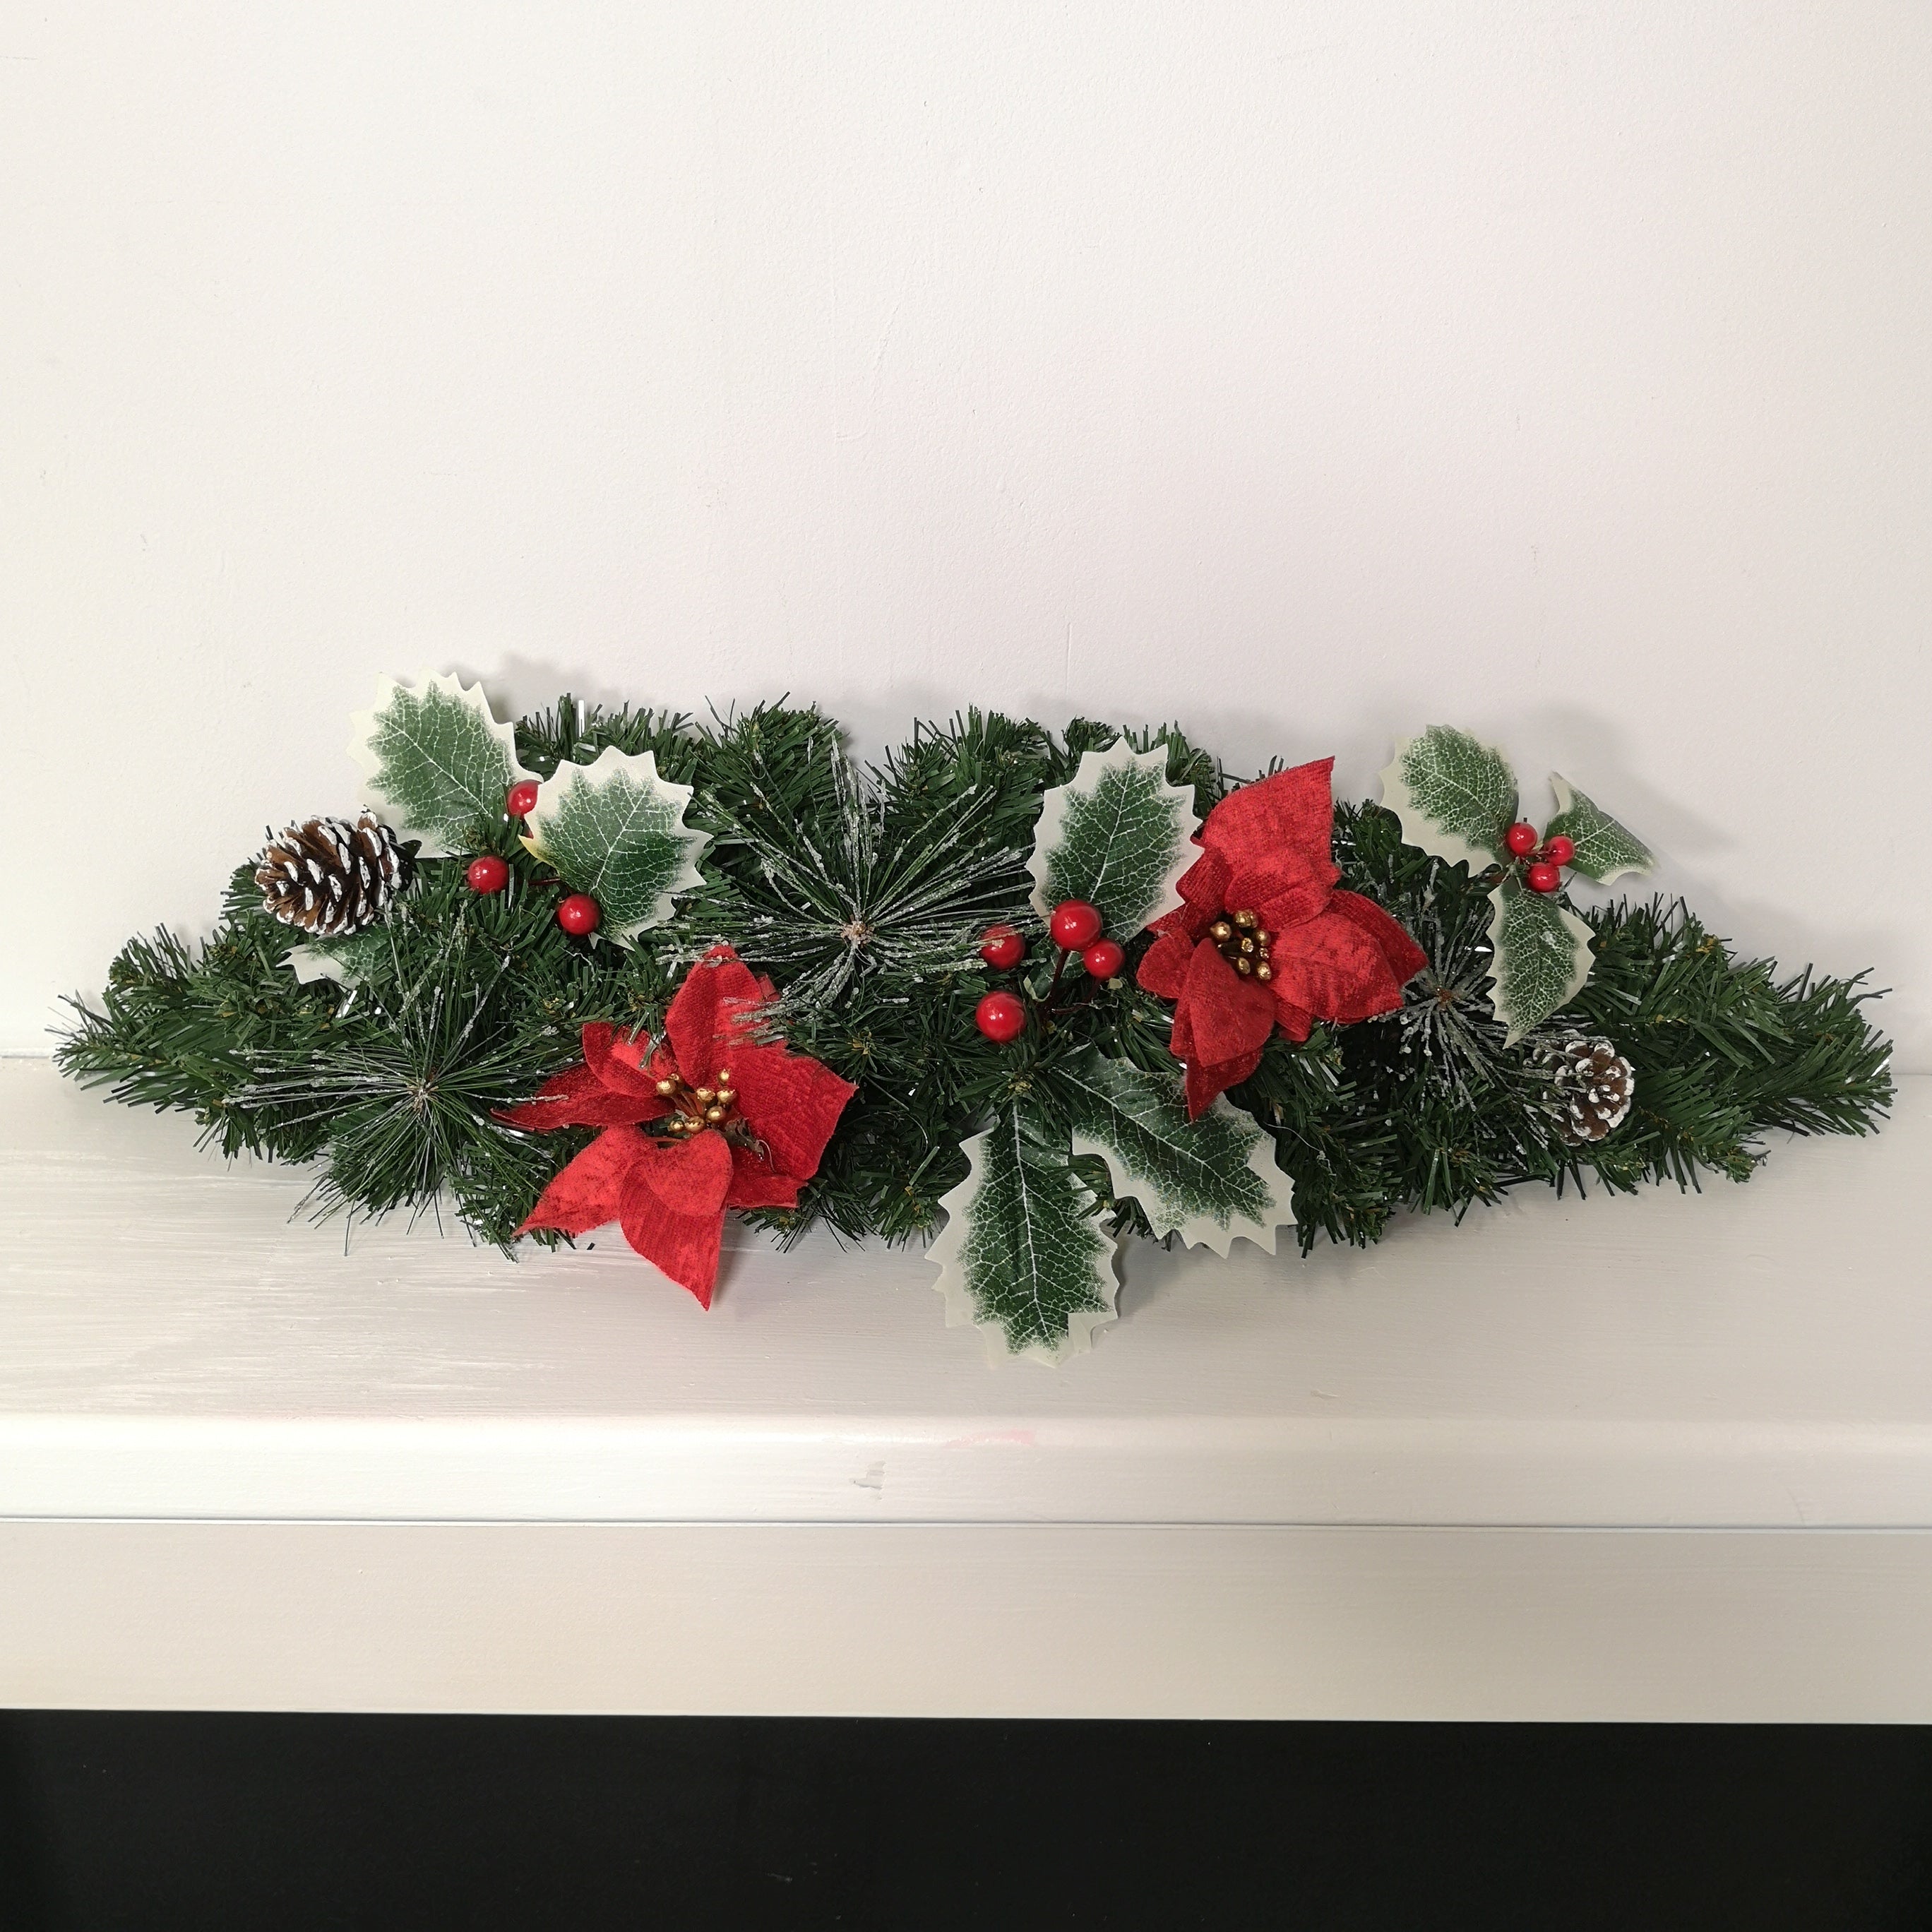 60cm Christmas Swag with Poinsettia and Holly Leaves / Berries